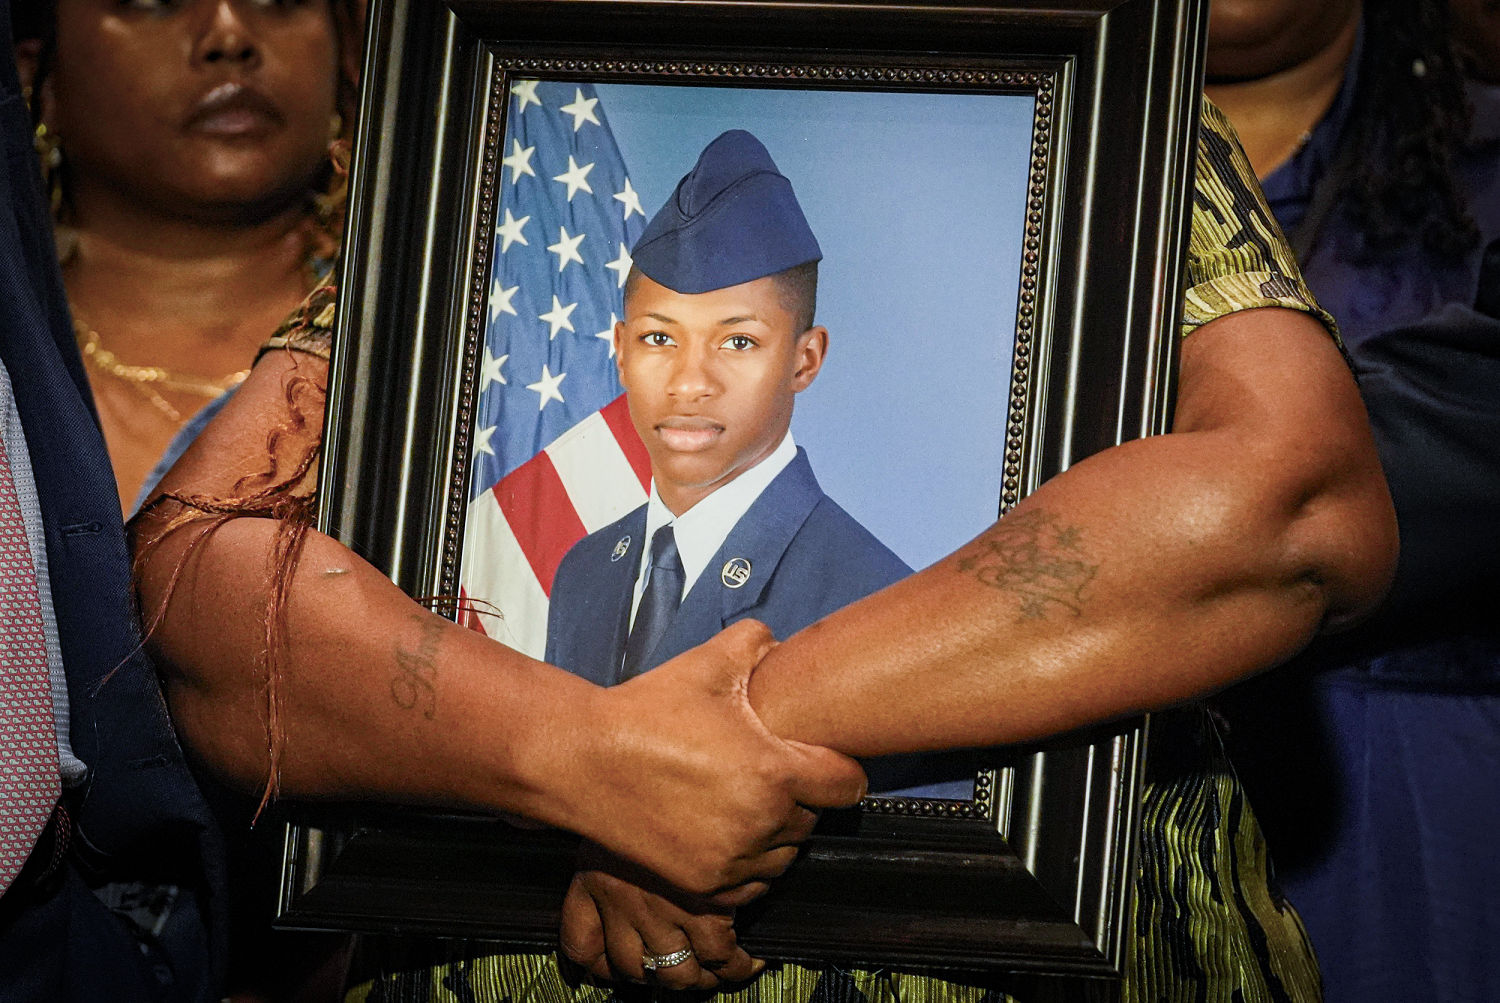 Roger Fortson fell victim to his country's fear of armed Black men